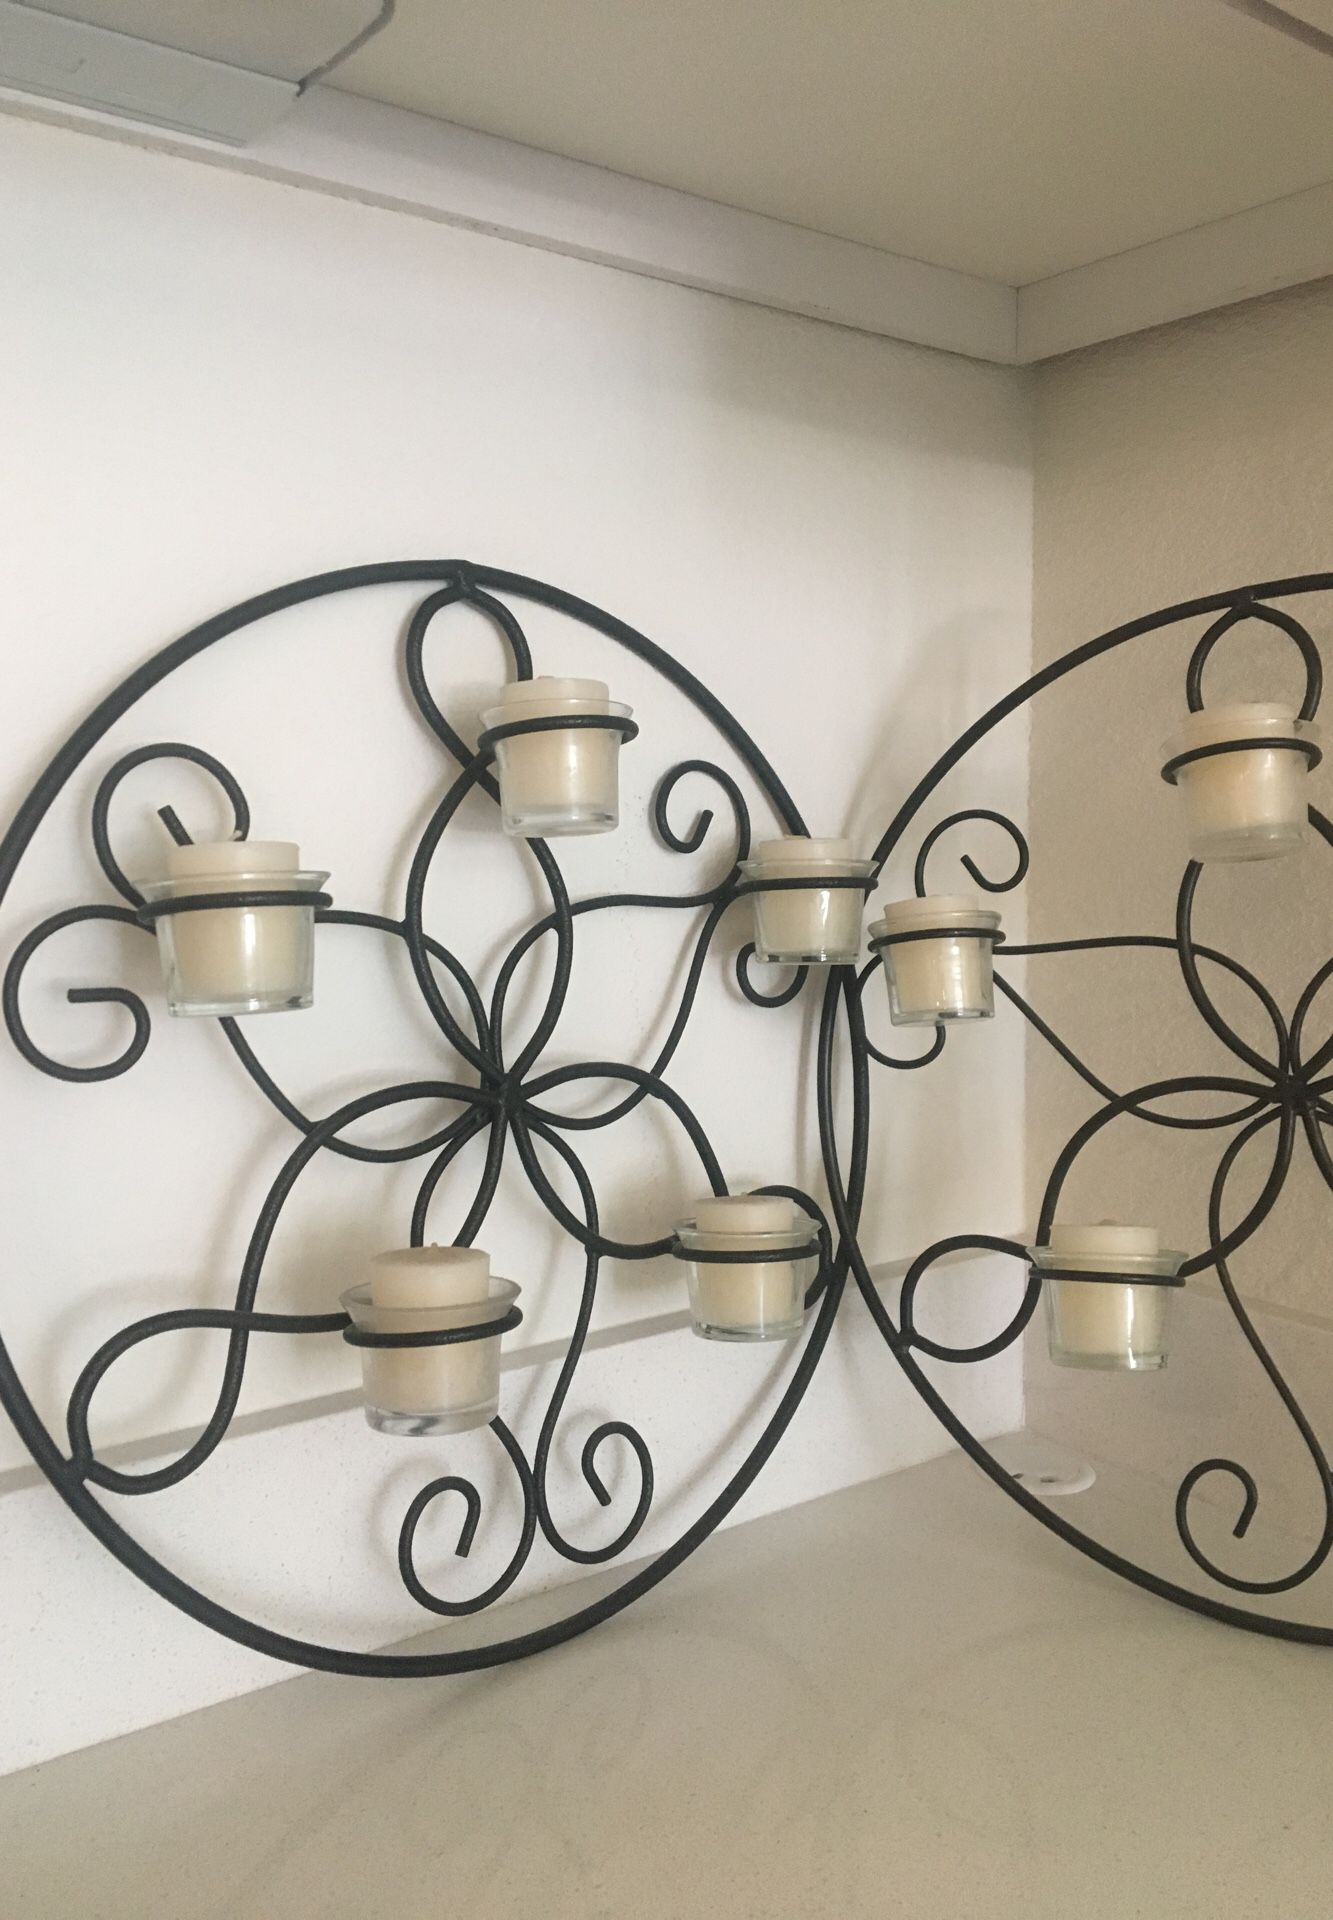 Steel wall decoration with candles